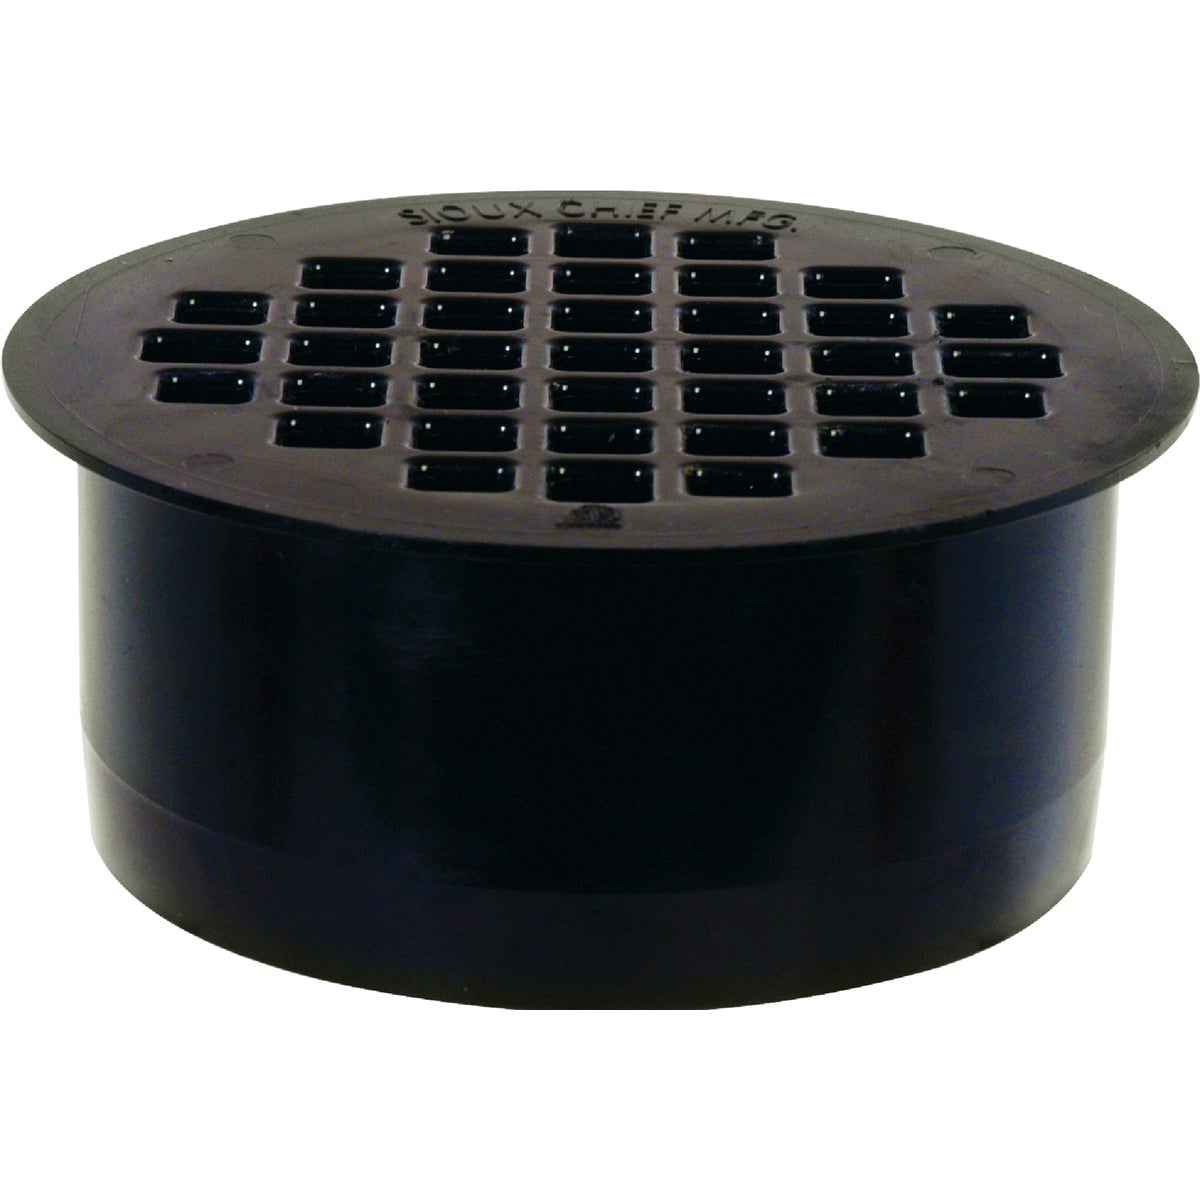 Item 406511, ABS snap-in drain fits inside Schedule 40 DWV pipe cut flush to floor.